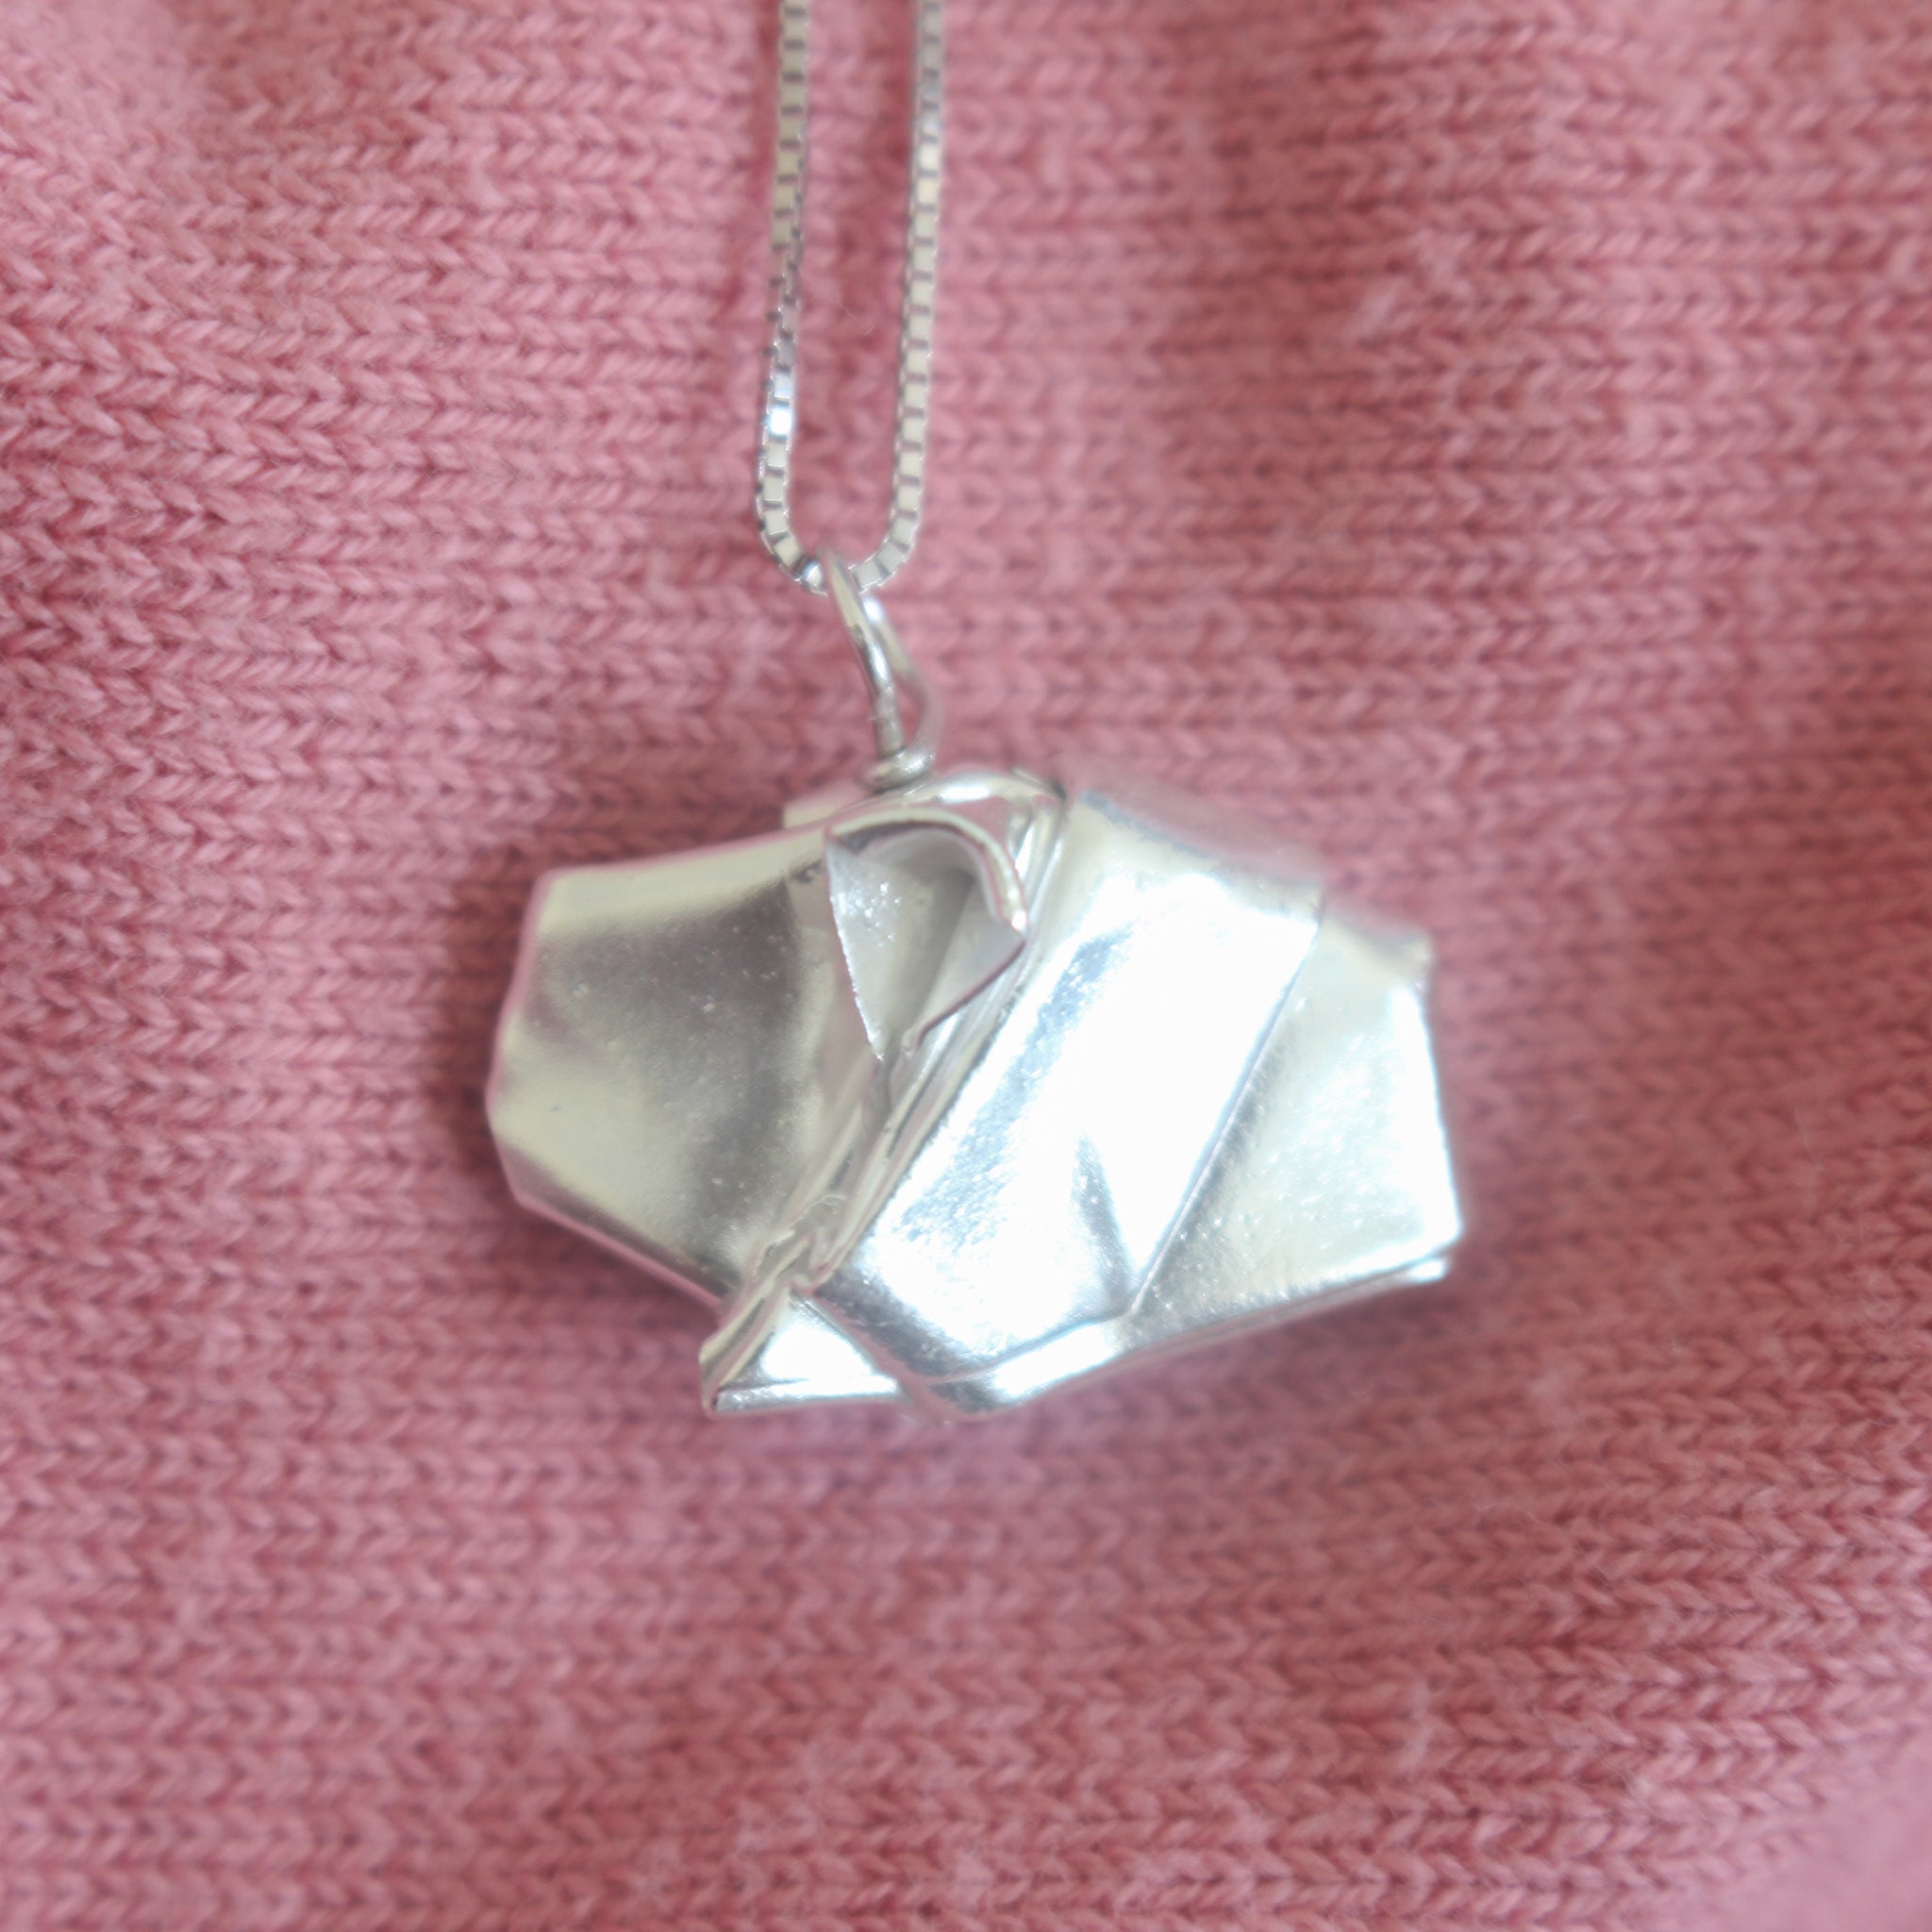 Silver Origami Hamster Necklace